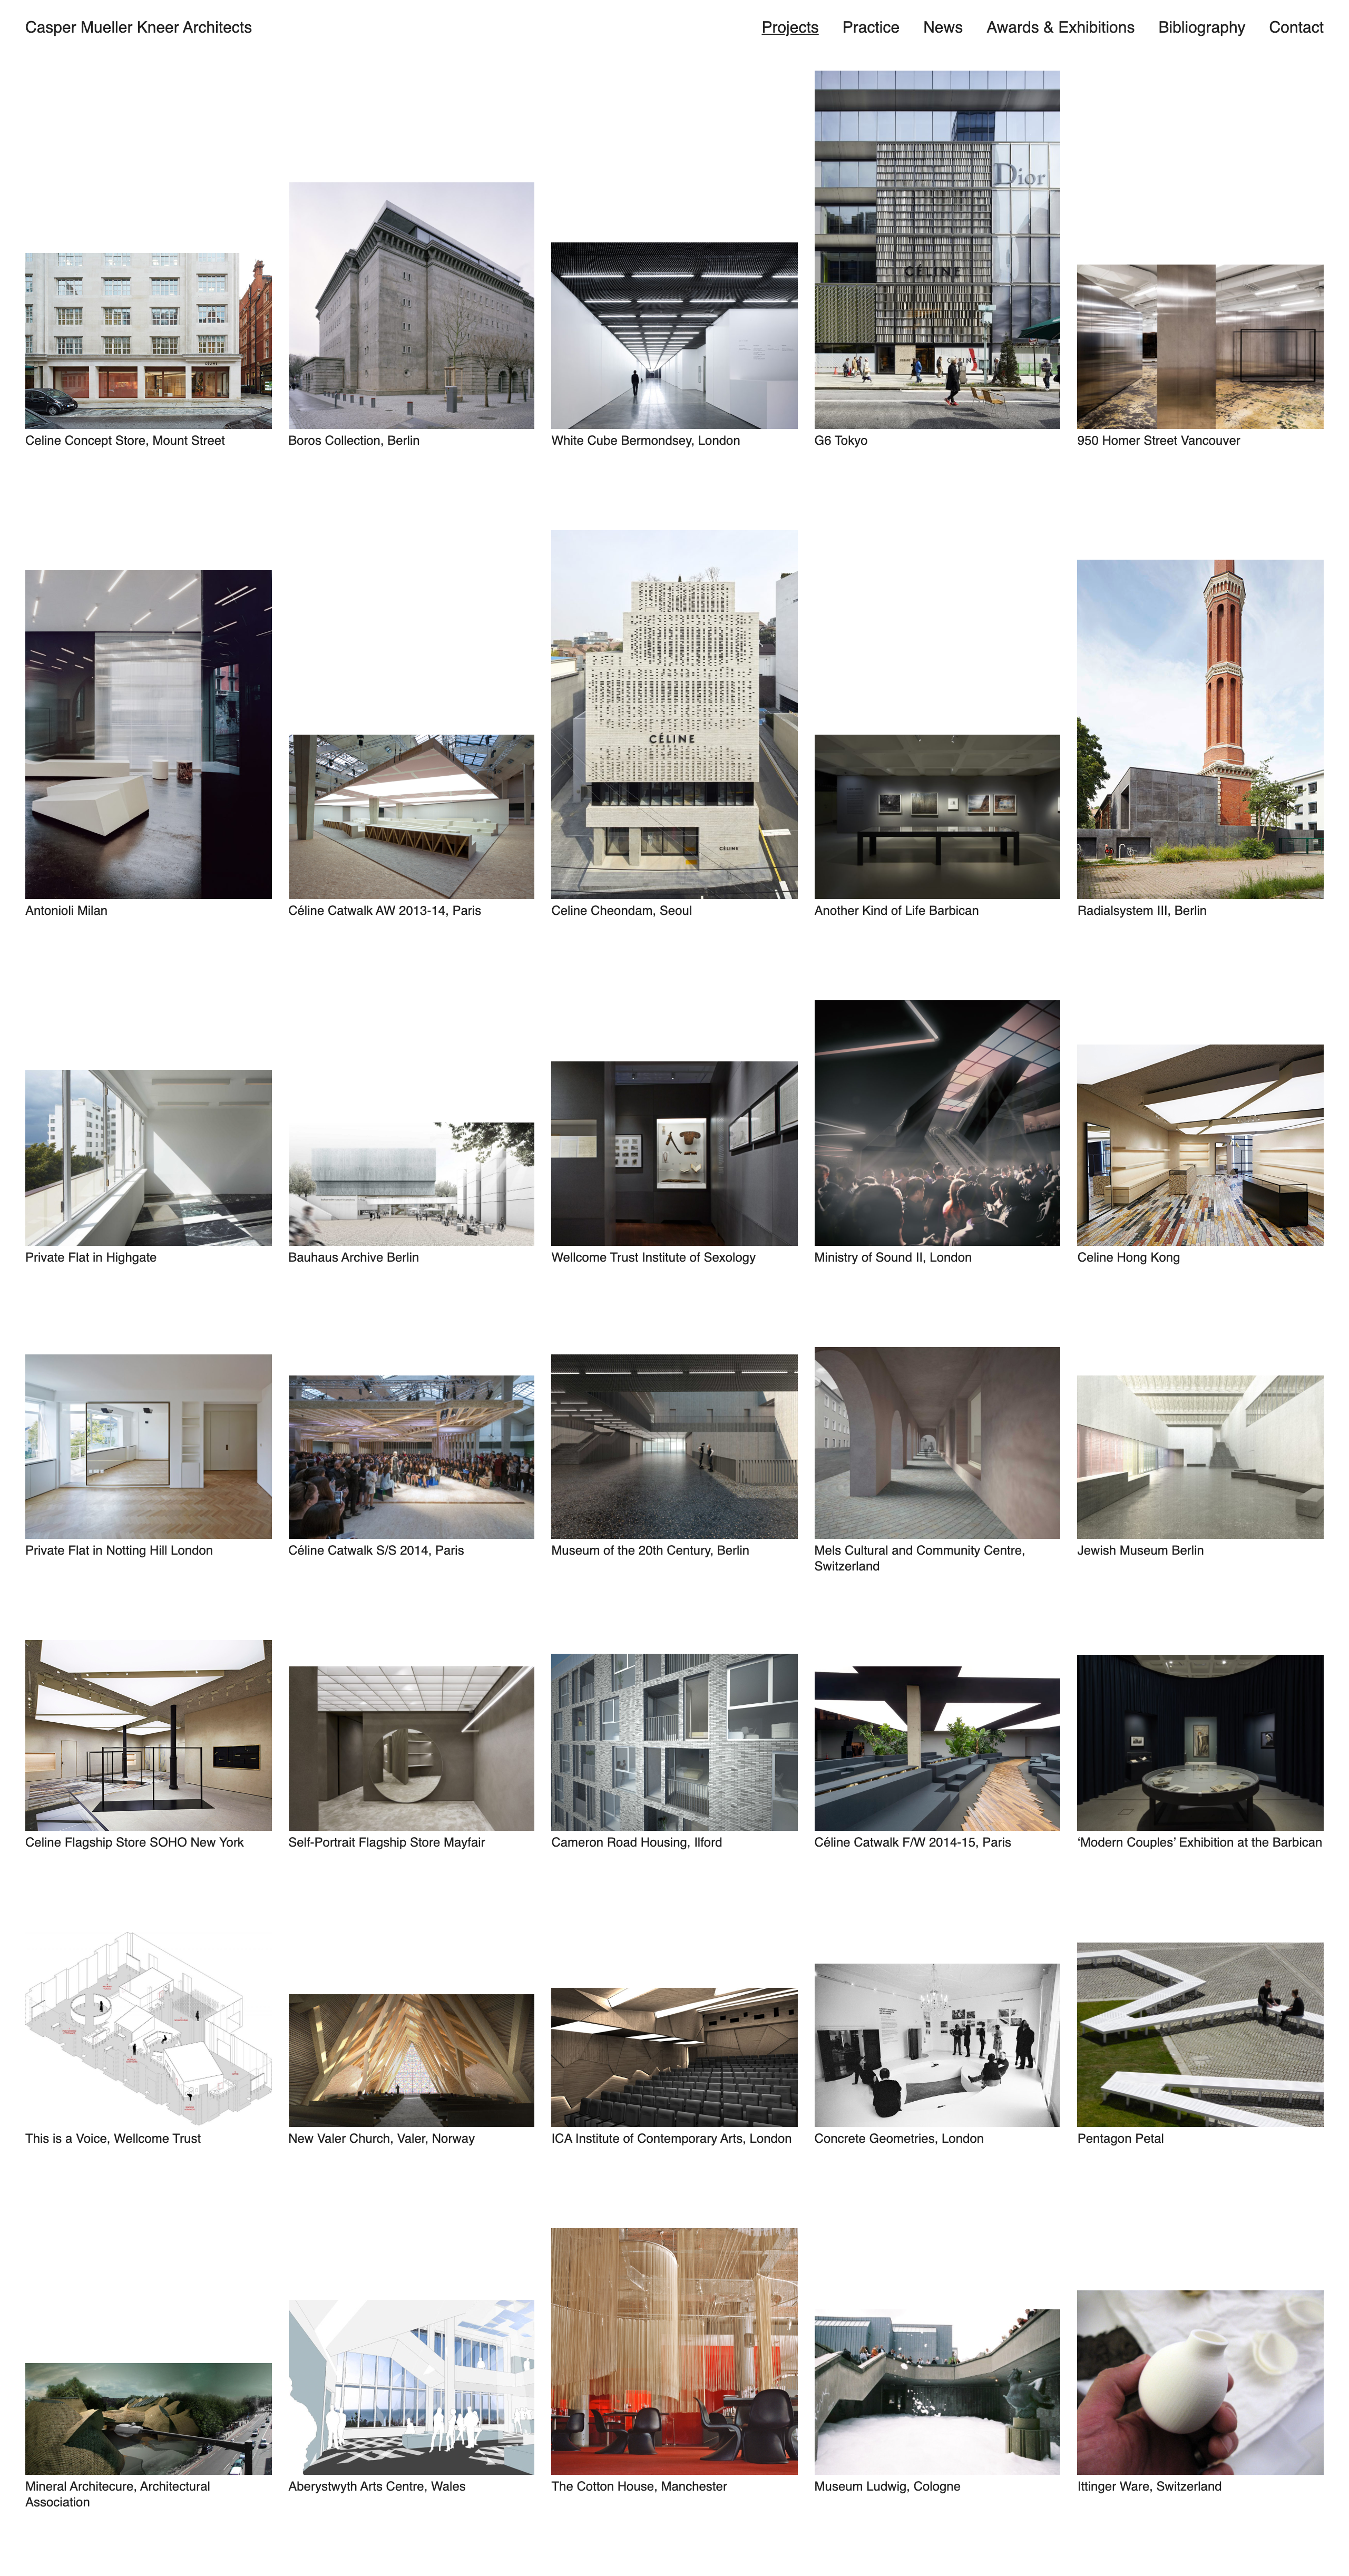 Projects page showing thumbnails of all projects